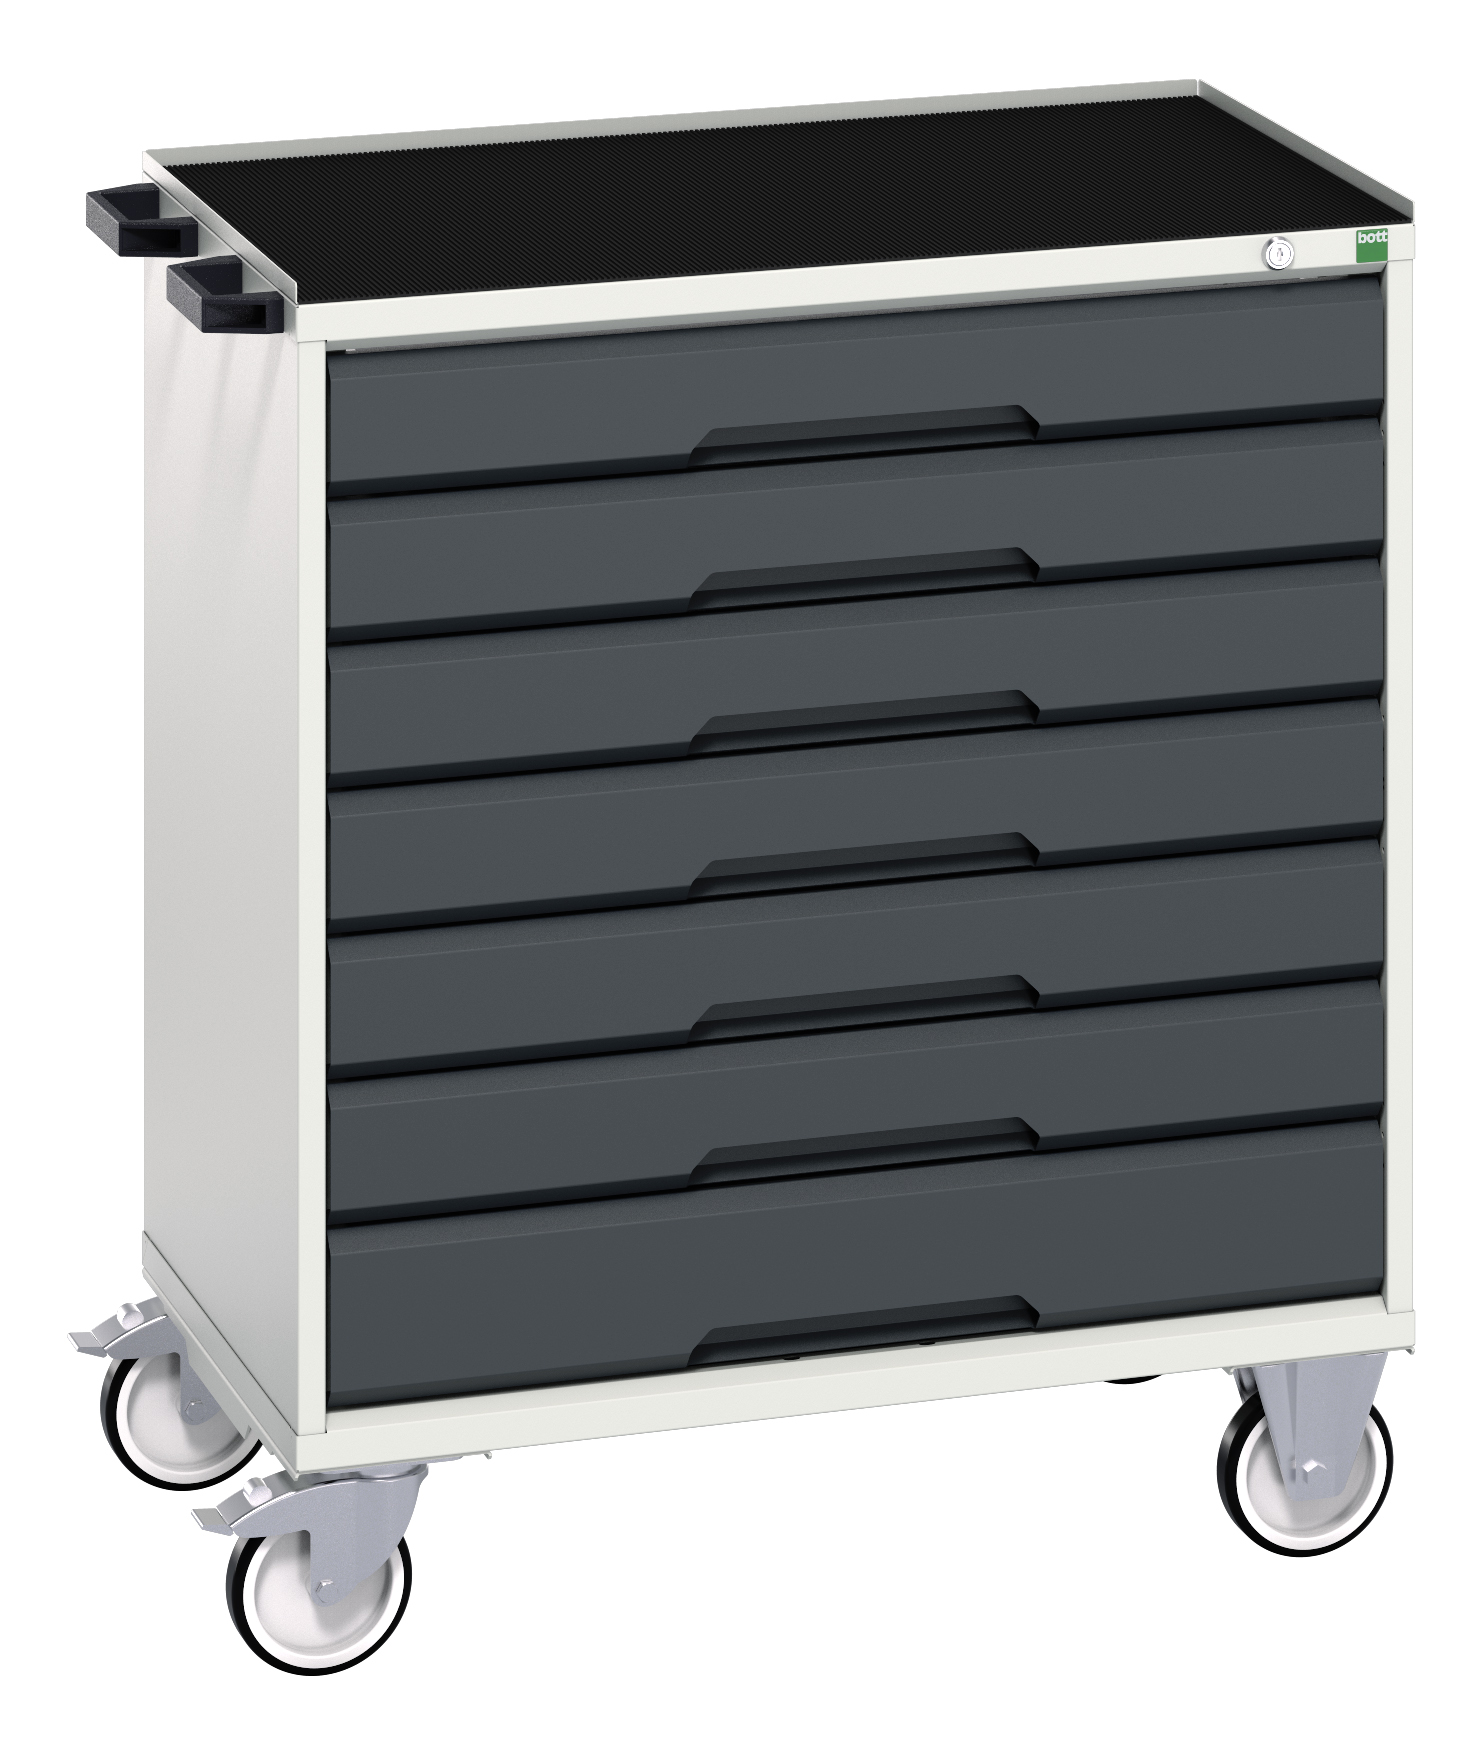 Bott Verso Mobile Drawer Cabinet With 7 Drawers & Top Tray With Mat - 16927008.19